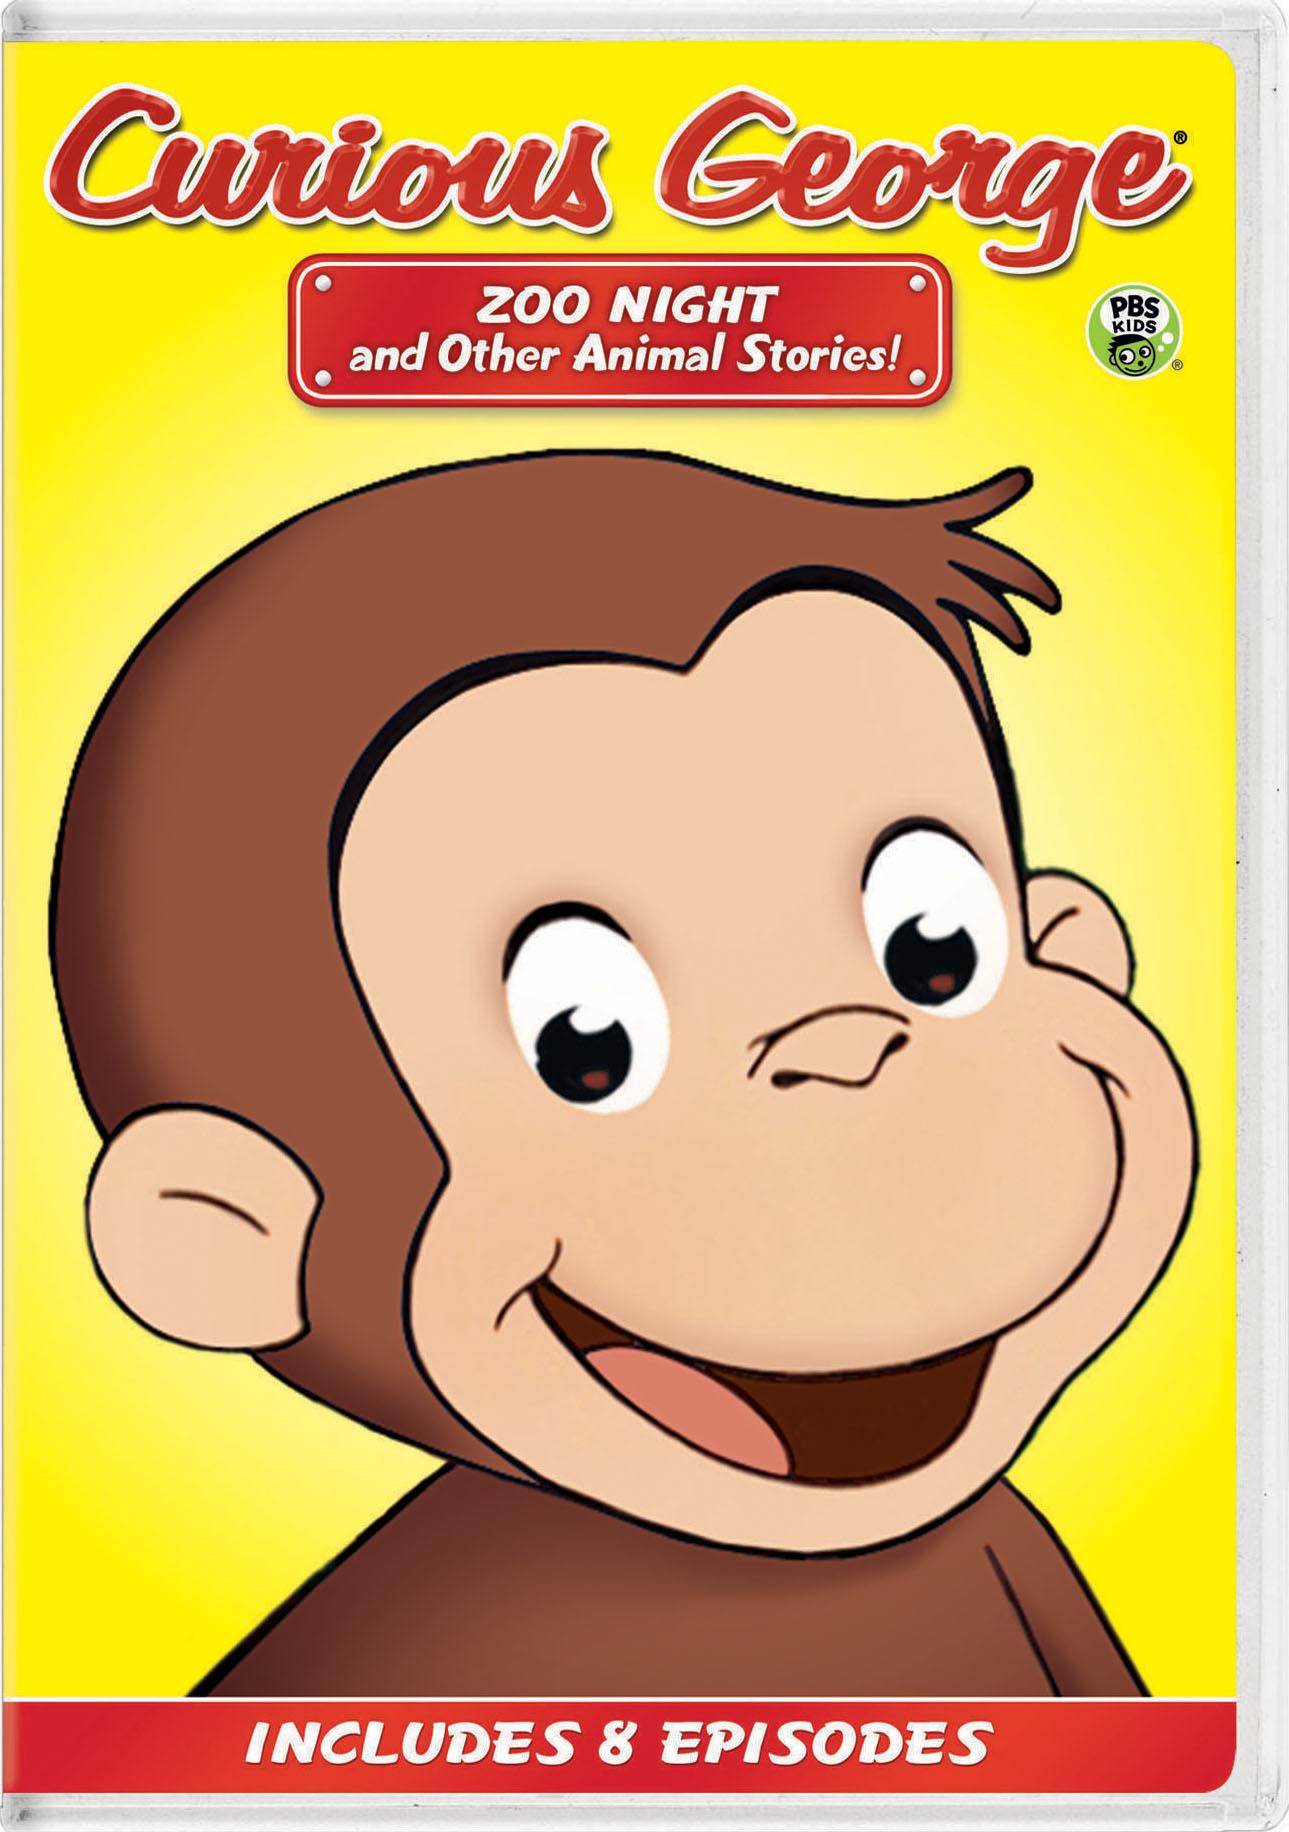 Curious George: Zoo Night and Other Animal Stories! (DVD), Universal Studios, Animation - image 1 of 2